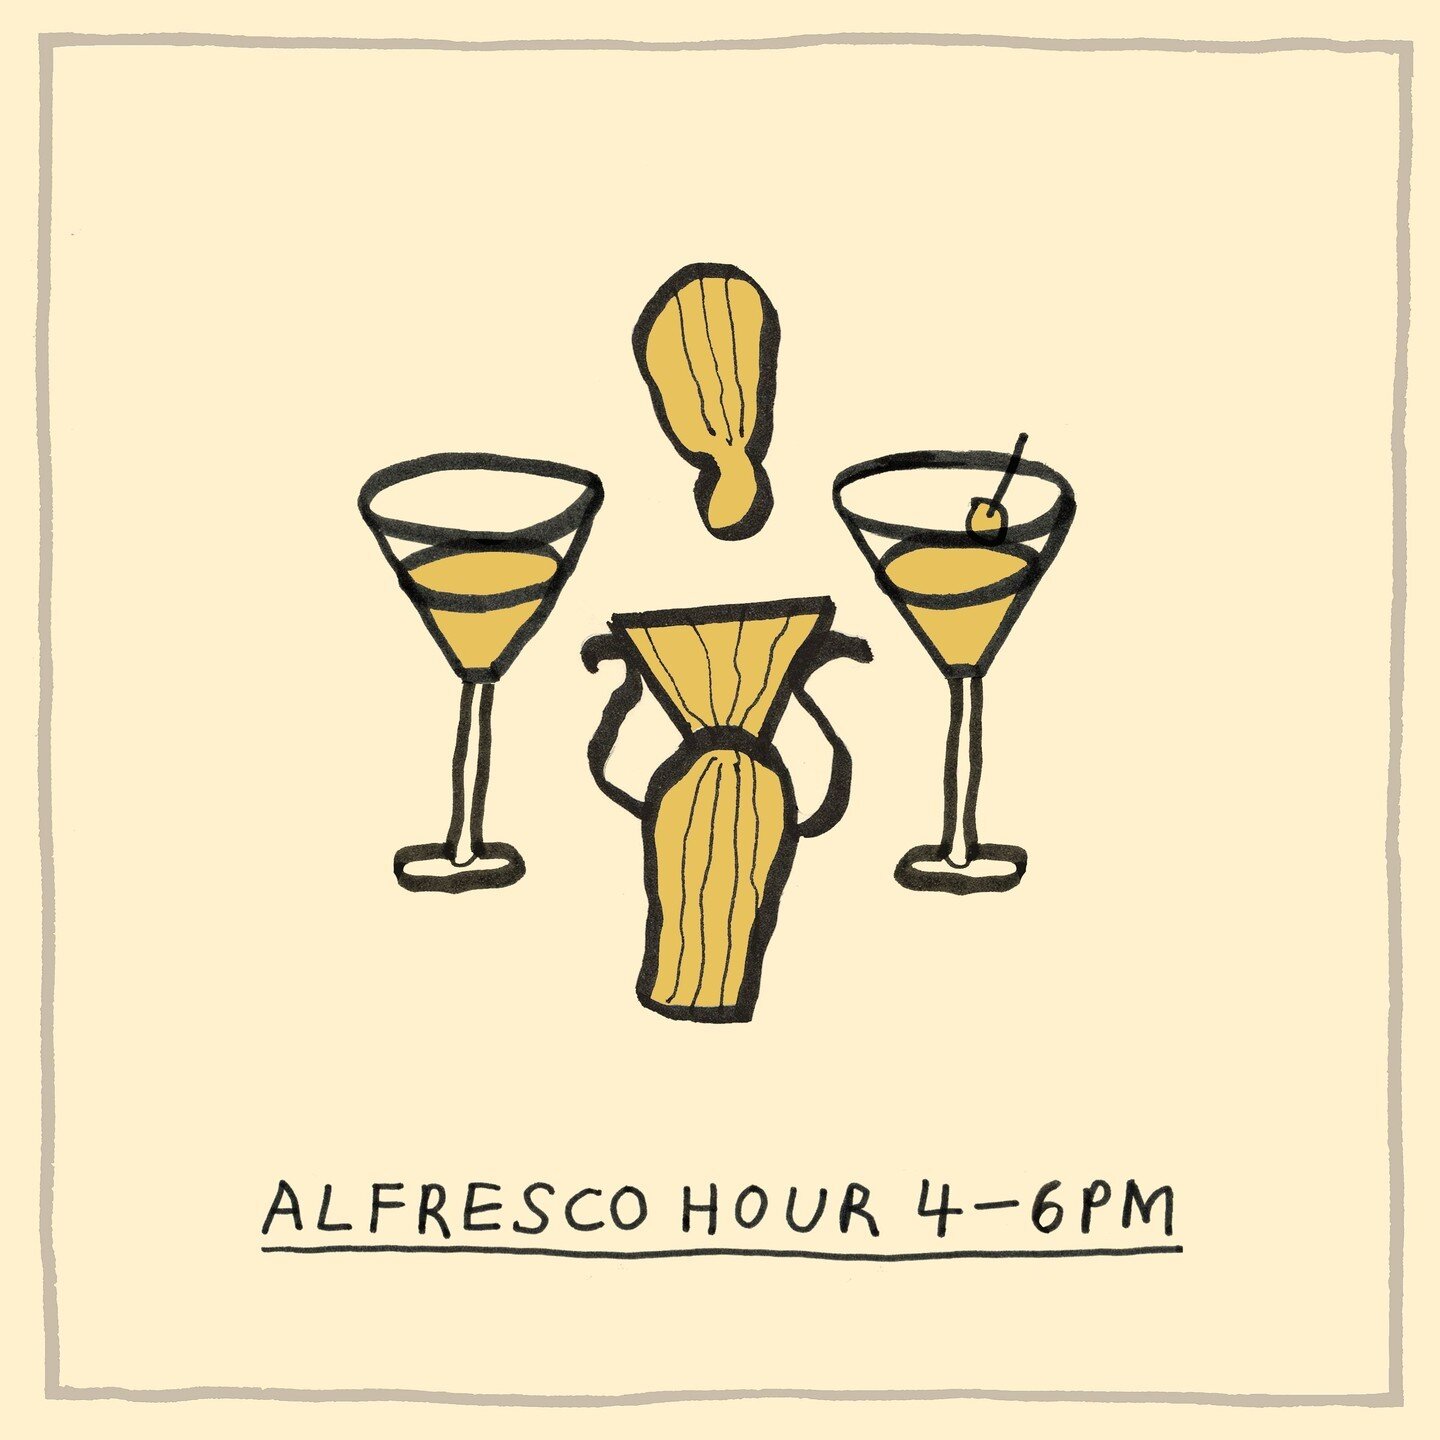 Alfresco hour Thursdays &amp; Fridays from 4-6pm upstairs! 
Cold drinks &amp; snacks at a dang good price!